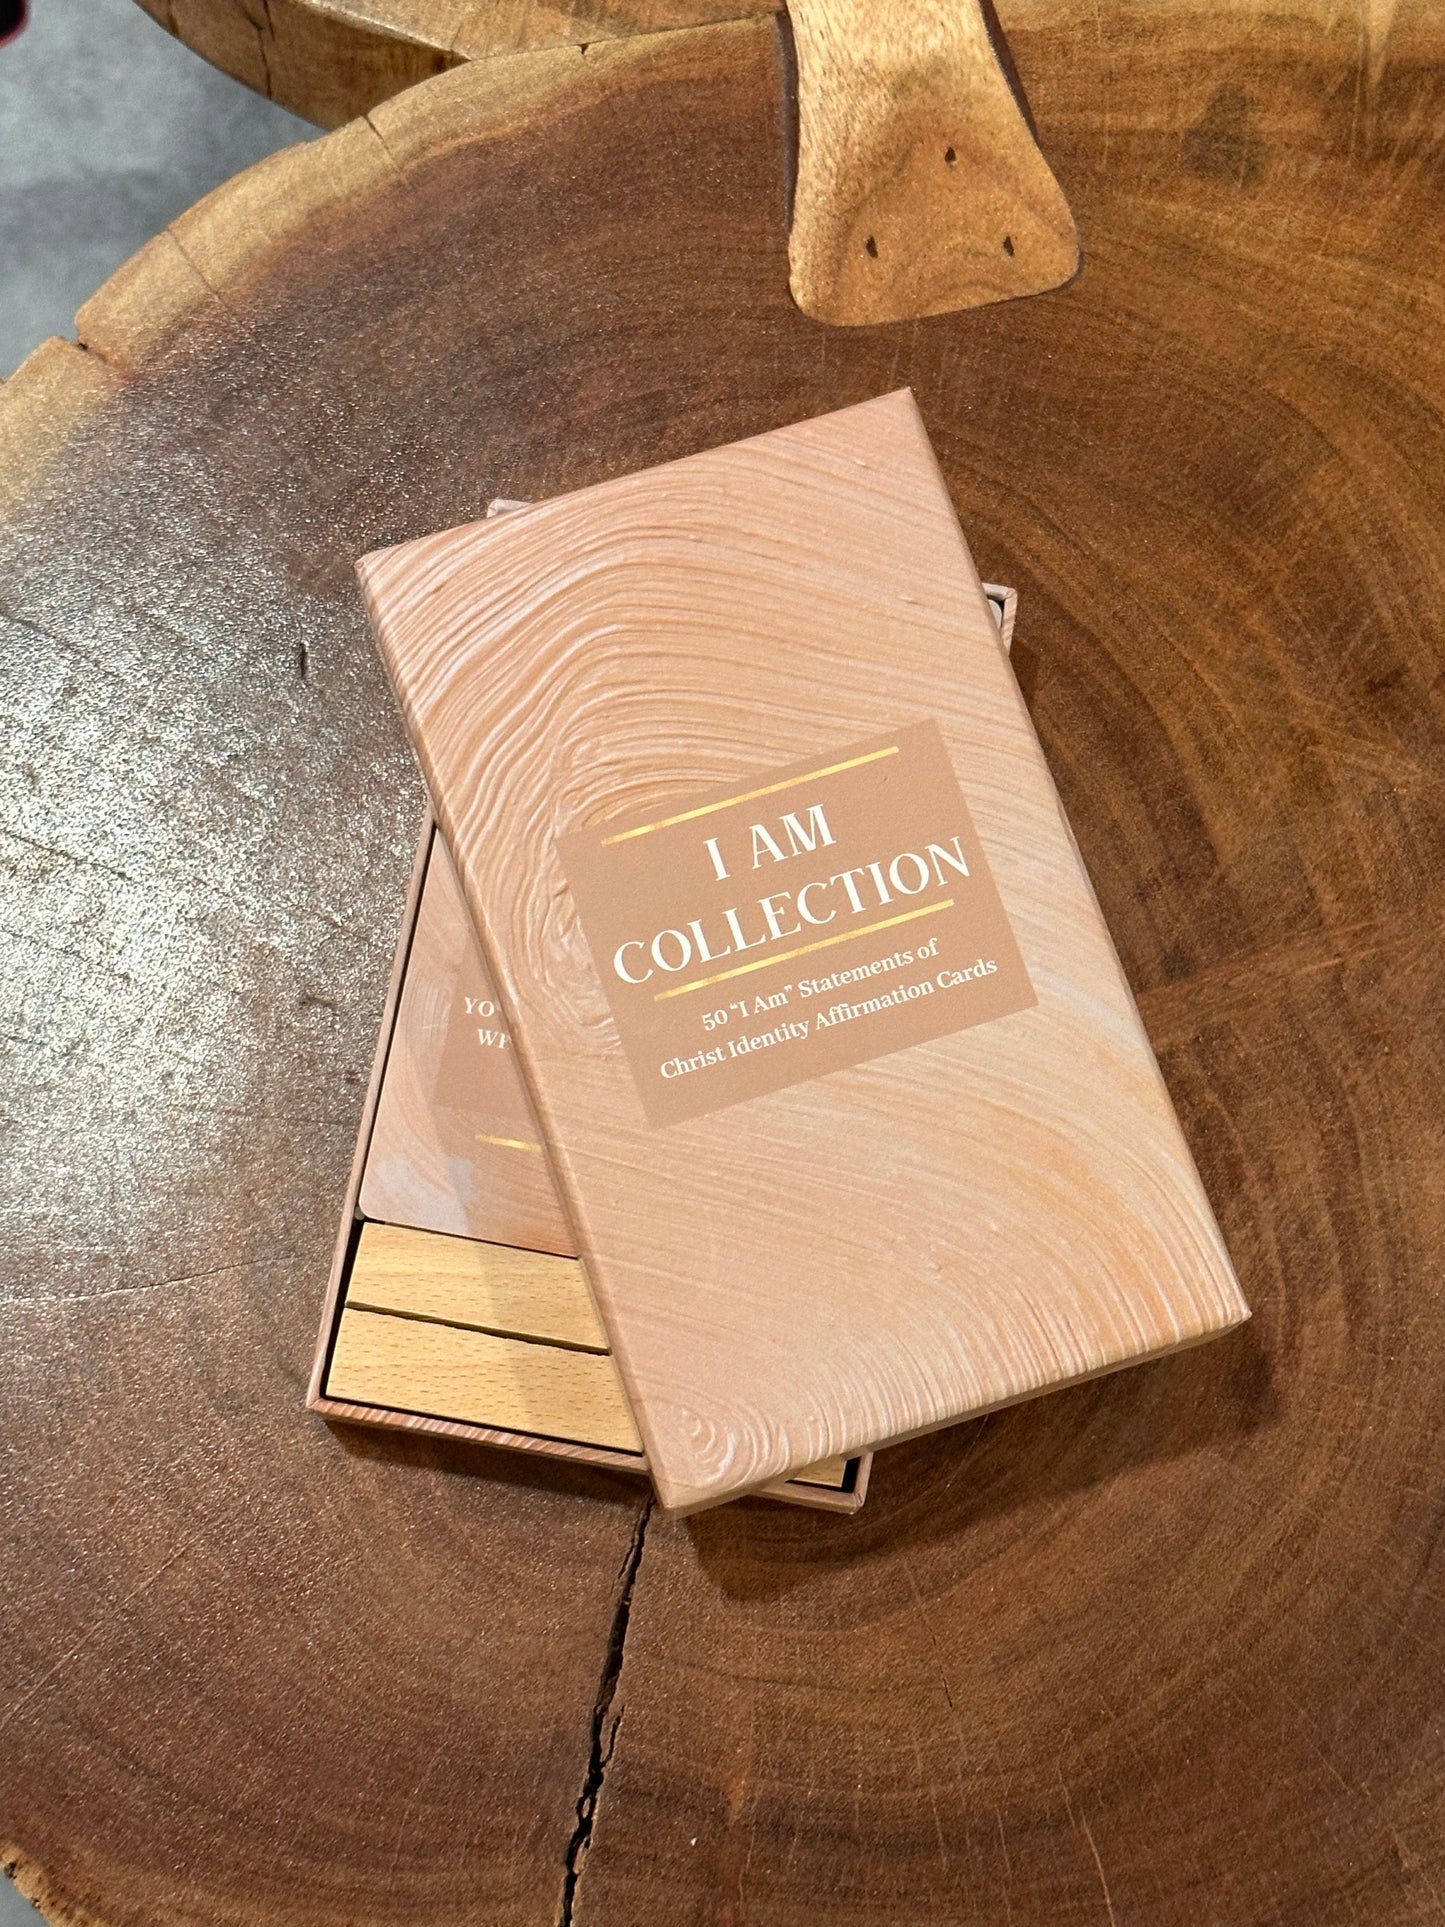 I AM Collection: Christ Identity Affirmation Cards